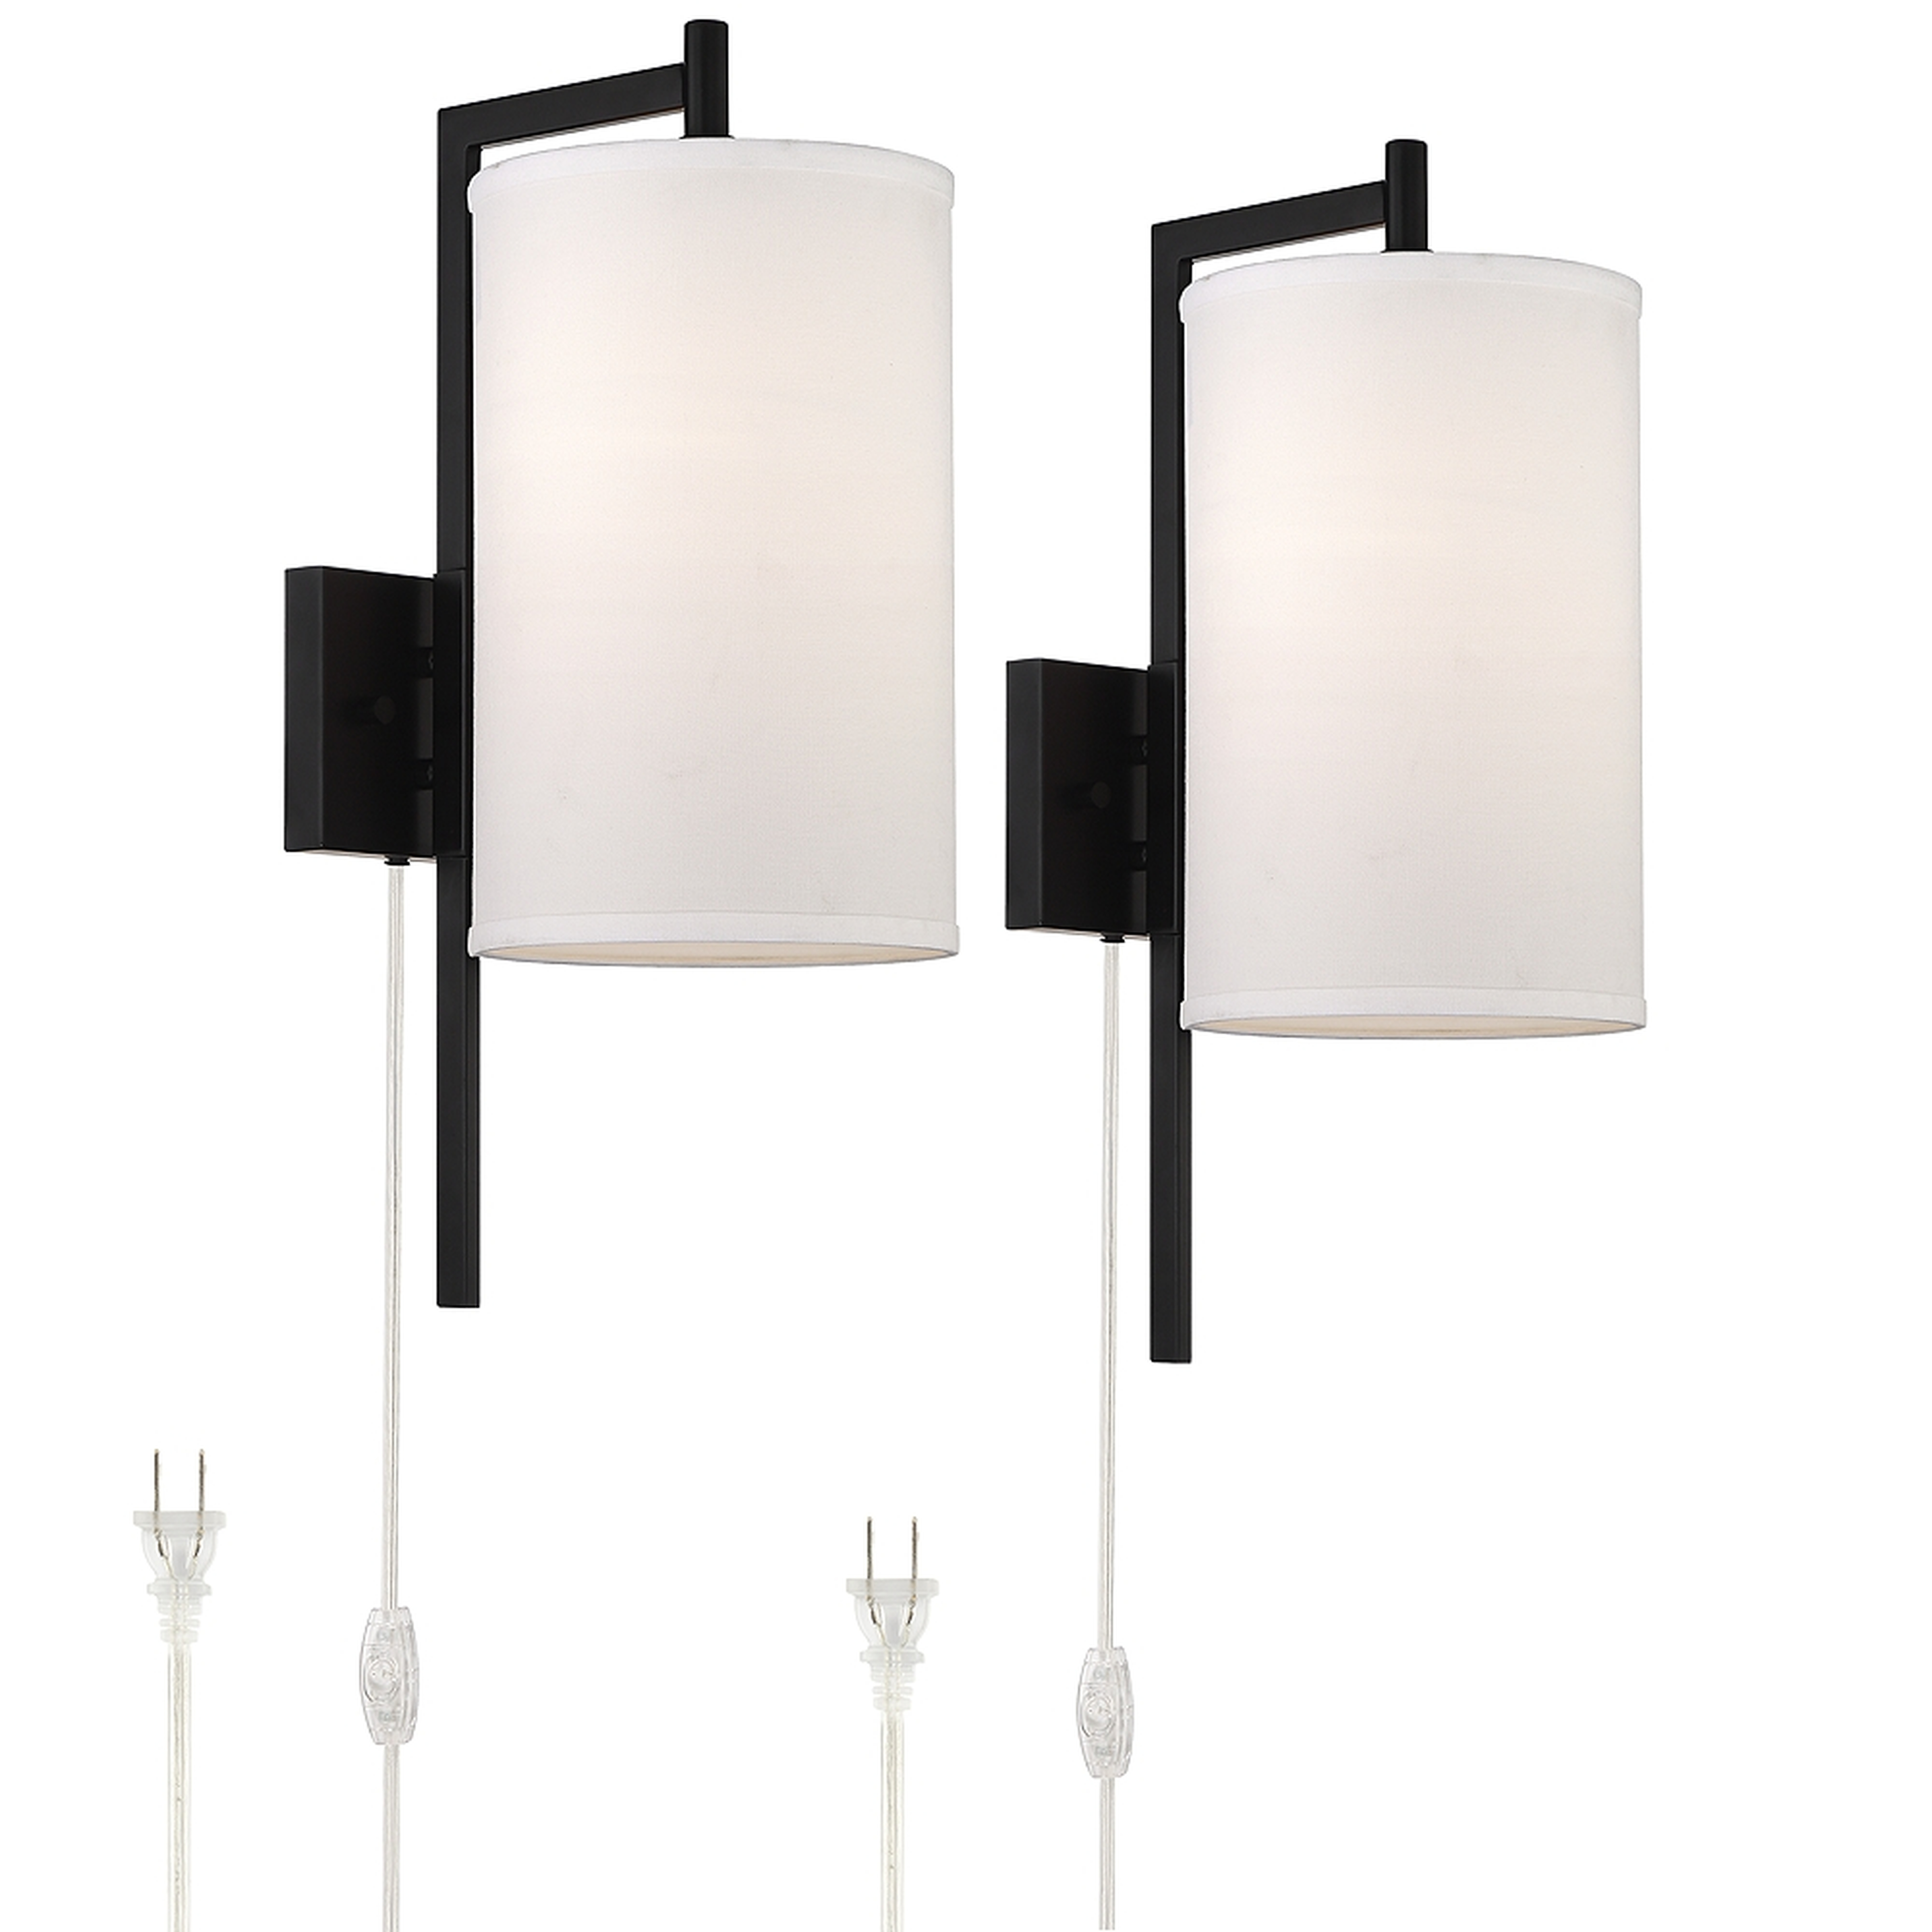 Bixby Modern Plug-In Wall Lamps Set of 2 - Style # 93A48 - Lamps Plus